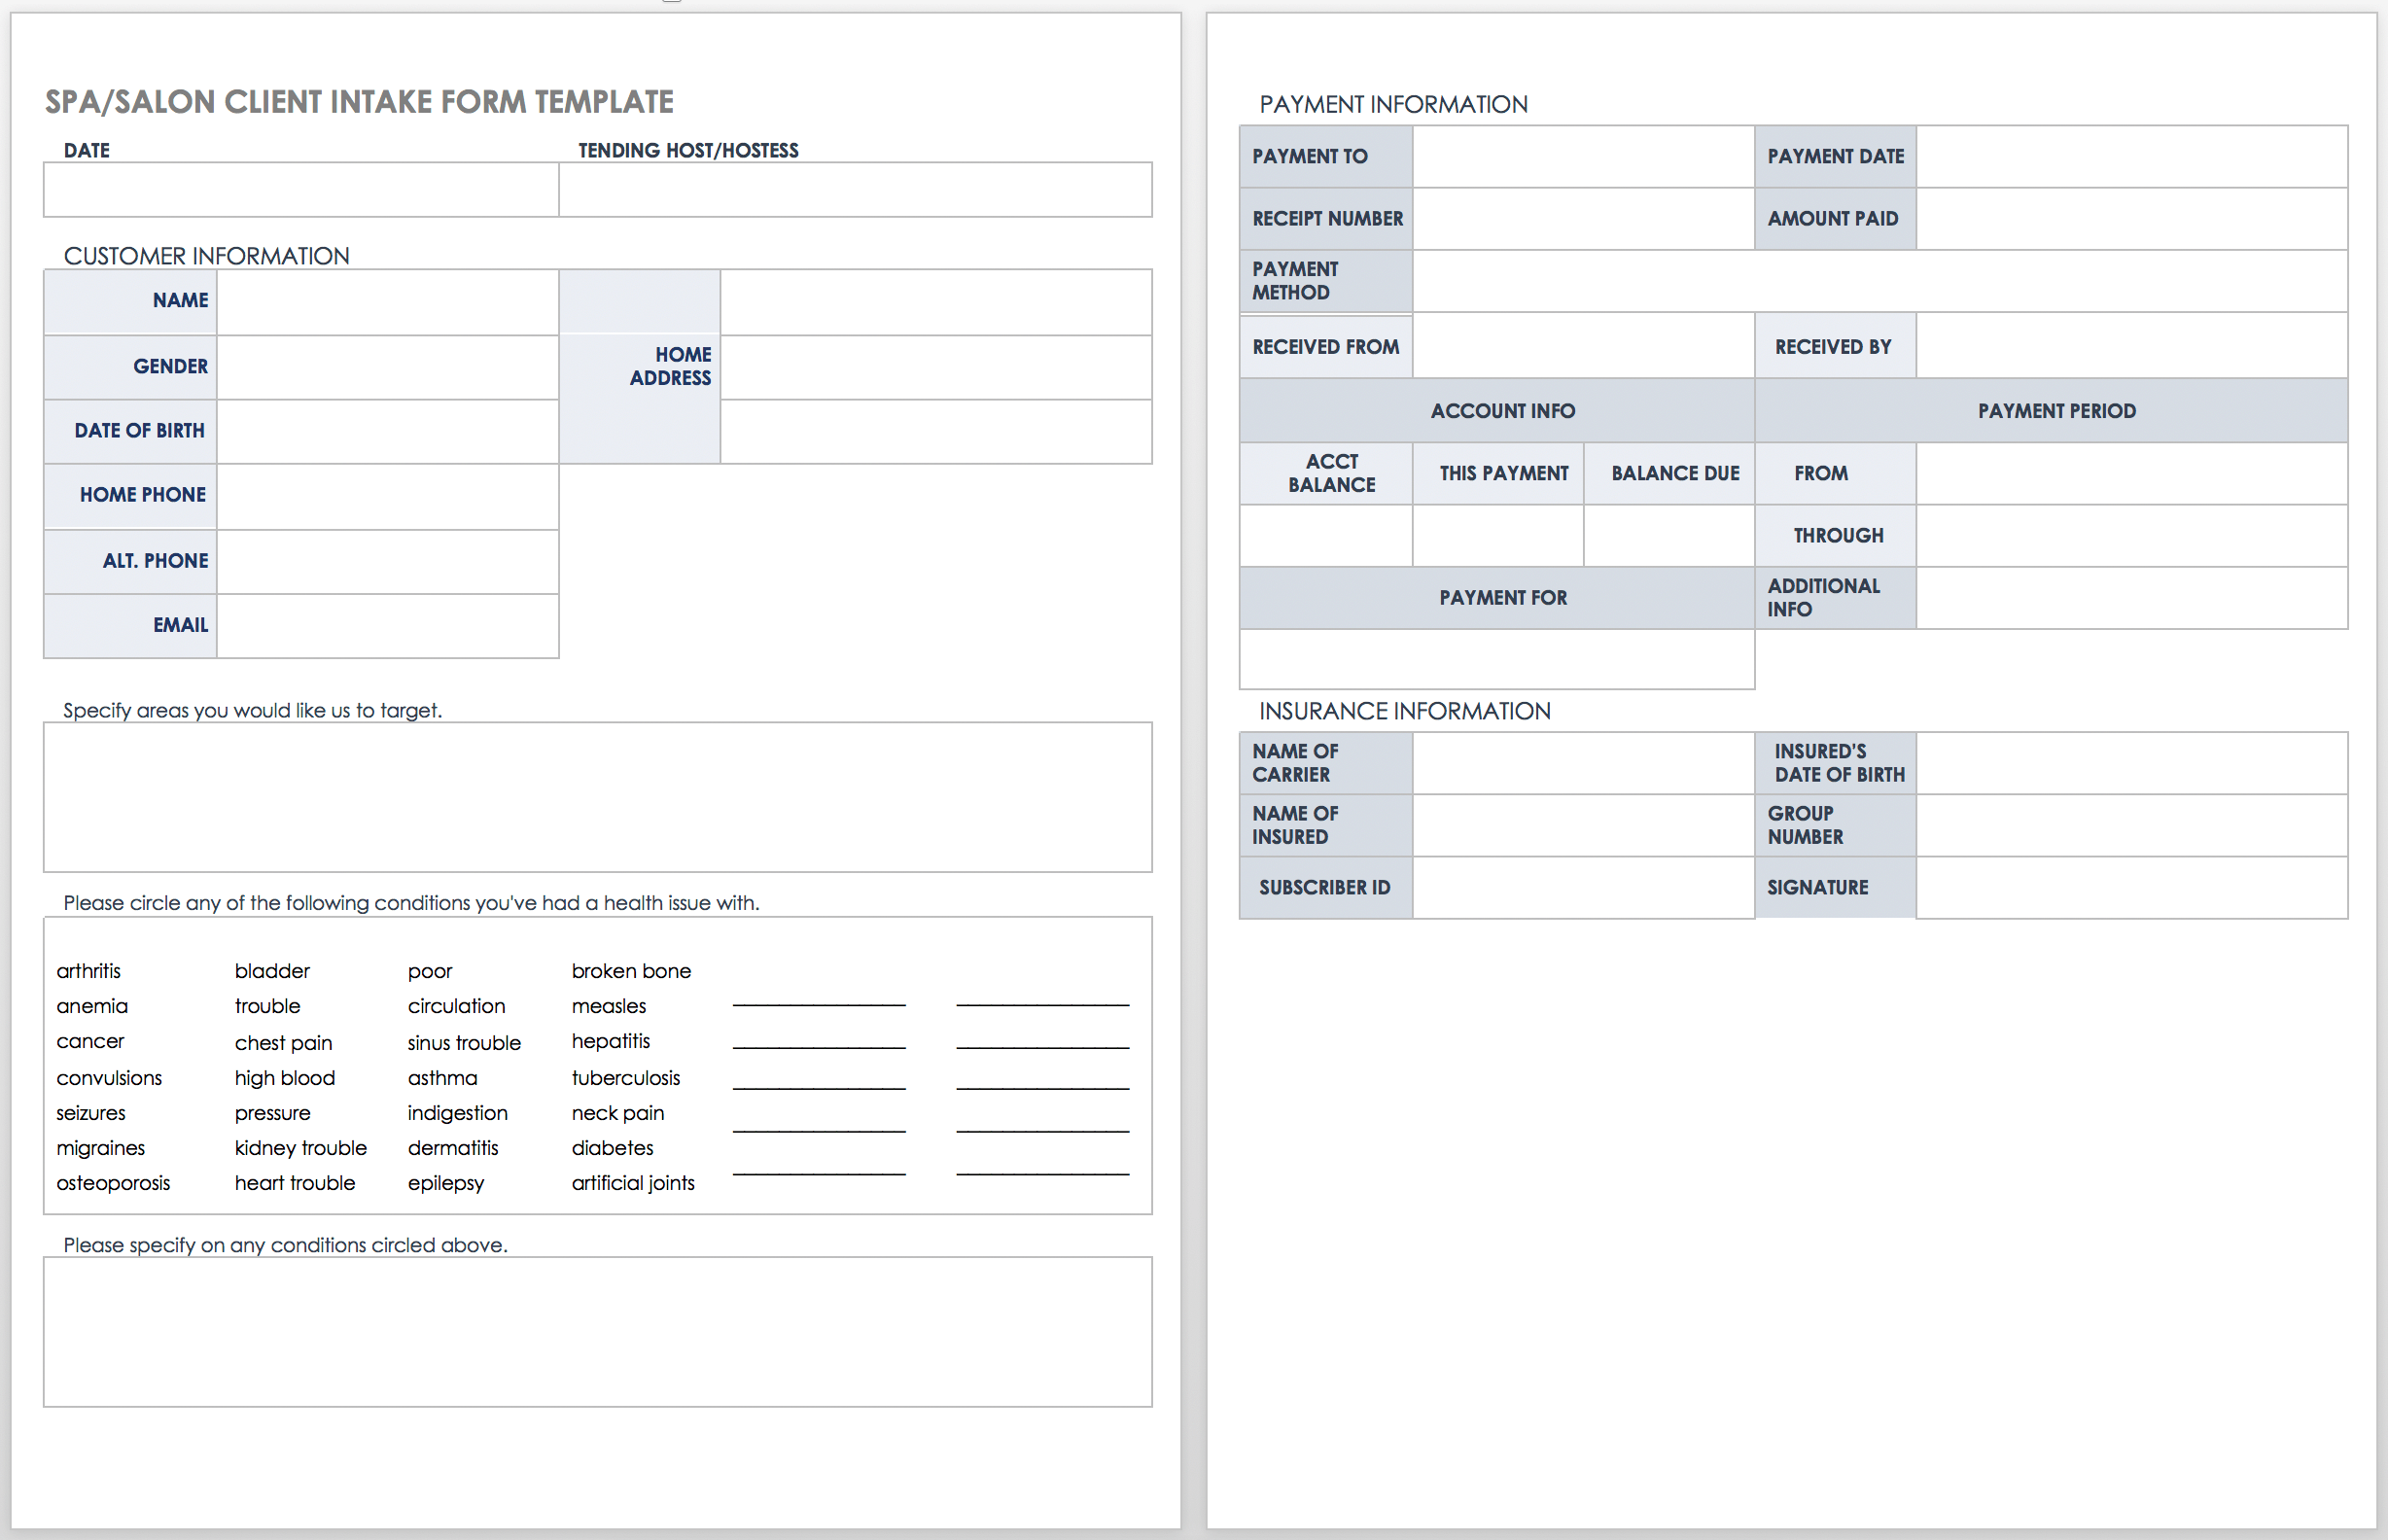 Client Intake Form Template Word from www.smartsheet.com